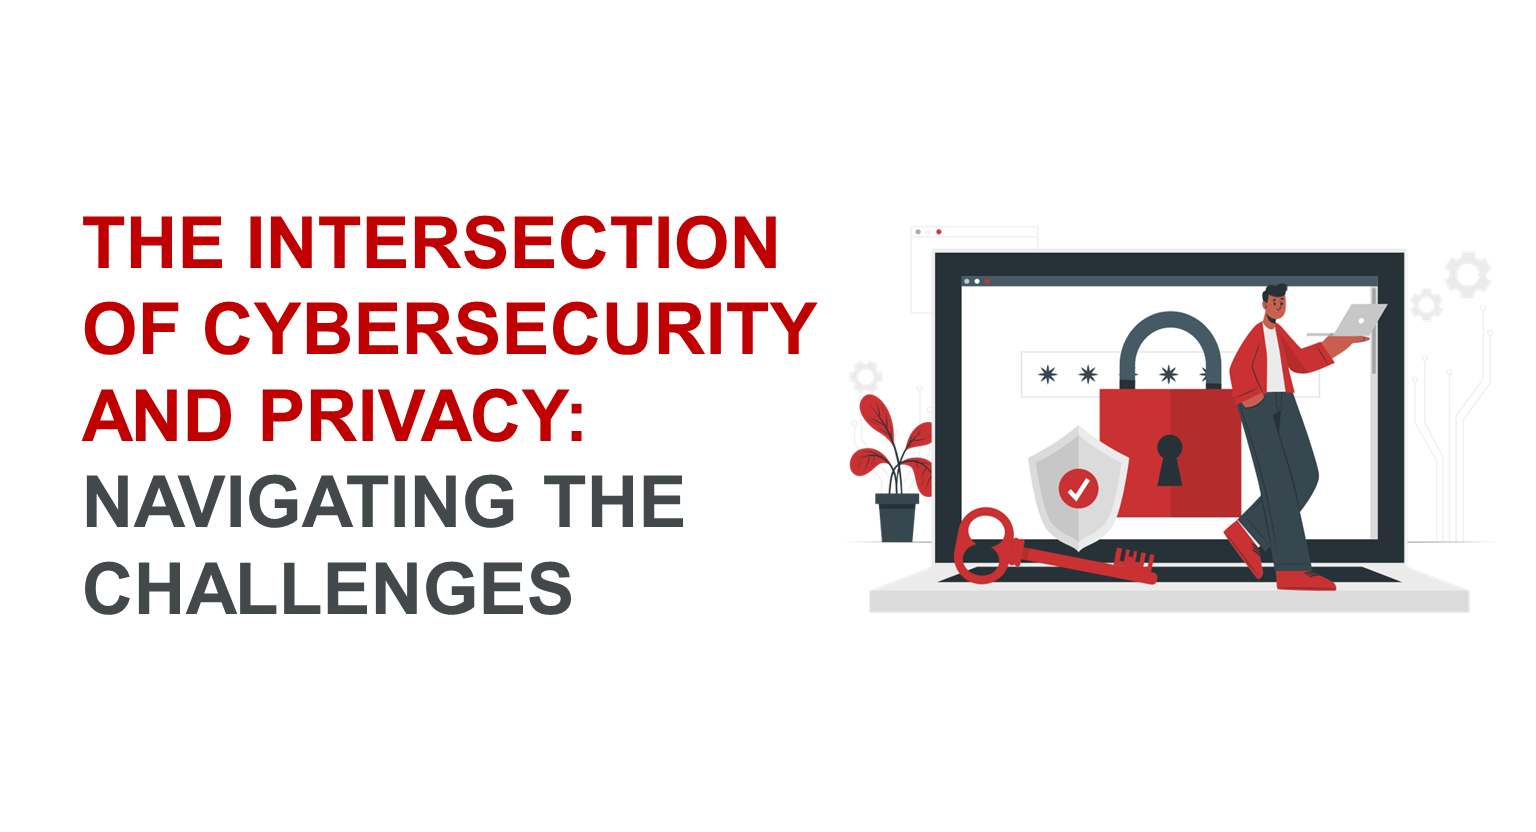 The Intersection of Cybersecurity and Privacy: Navigating the Challenges